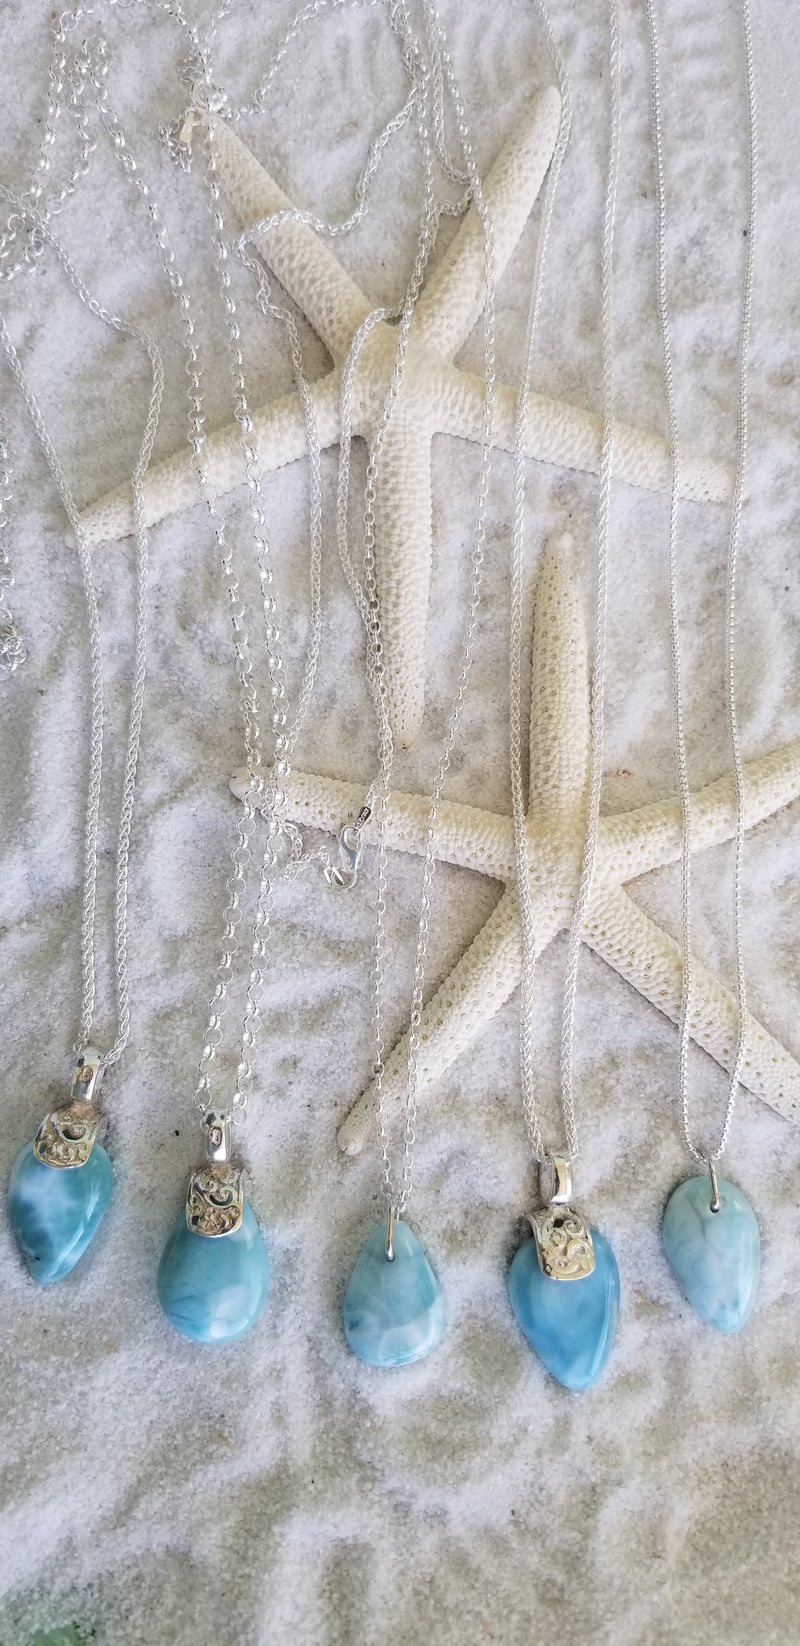 Larimar and Sterling Silver Filigree med. Organic shape (3) Pendant with Italian Sterling Silver Chain - LarimarOcean  